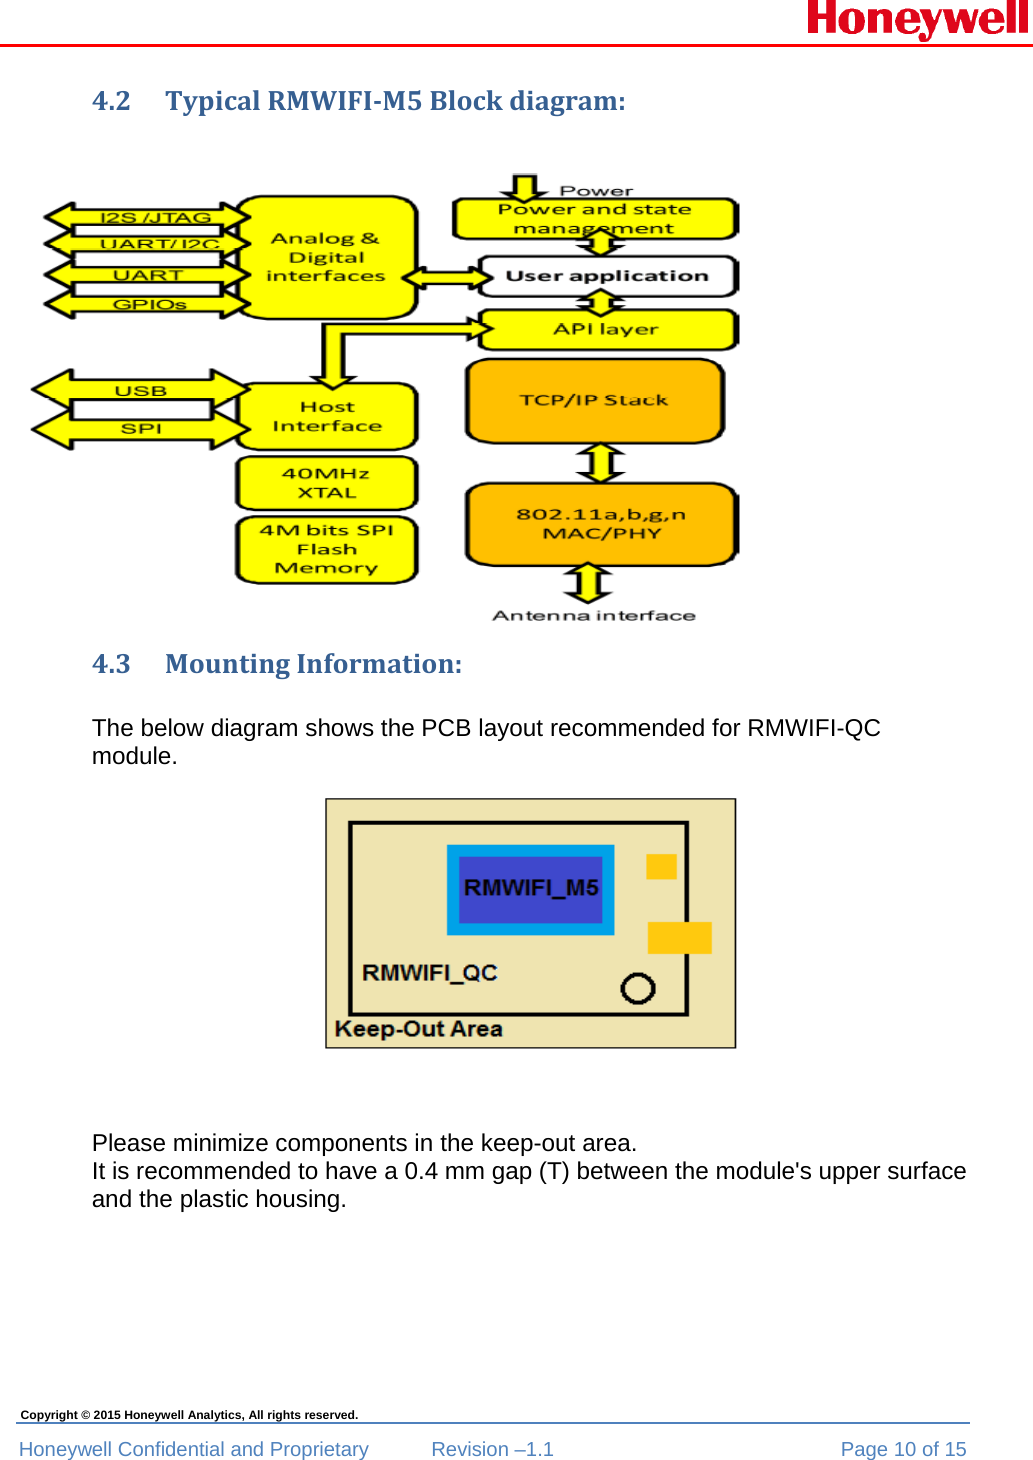  Honeywell Confidential and Proprietary  Revision –1.1  Page 10 of 15 Copyright © 2015 Honeywell Analytics, All rights reserved. 4.2 TypicalRMWIFI‐M5Blockdiagram:4.3 MountingInformation:The below diagram shows the PCB layout recommended for RMWIFI-QC module.       Please minimize components in the keep-out area. It is recommended to have a 0.4 mm gap (T) between the module&apos;s upper surface and the plastic housing.                            